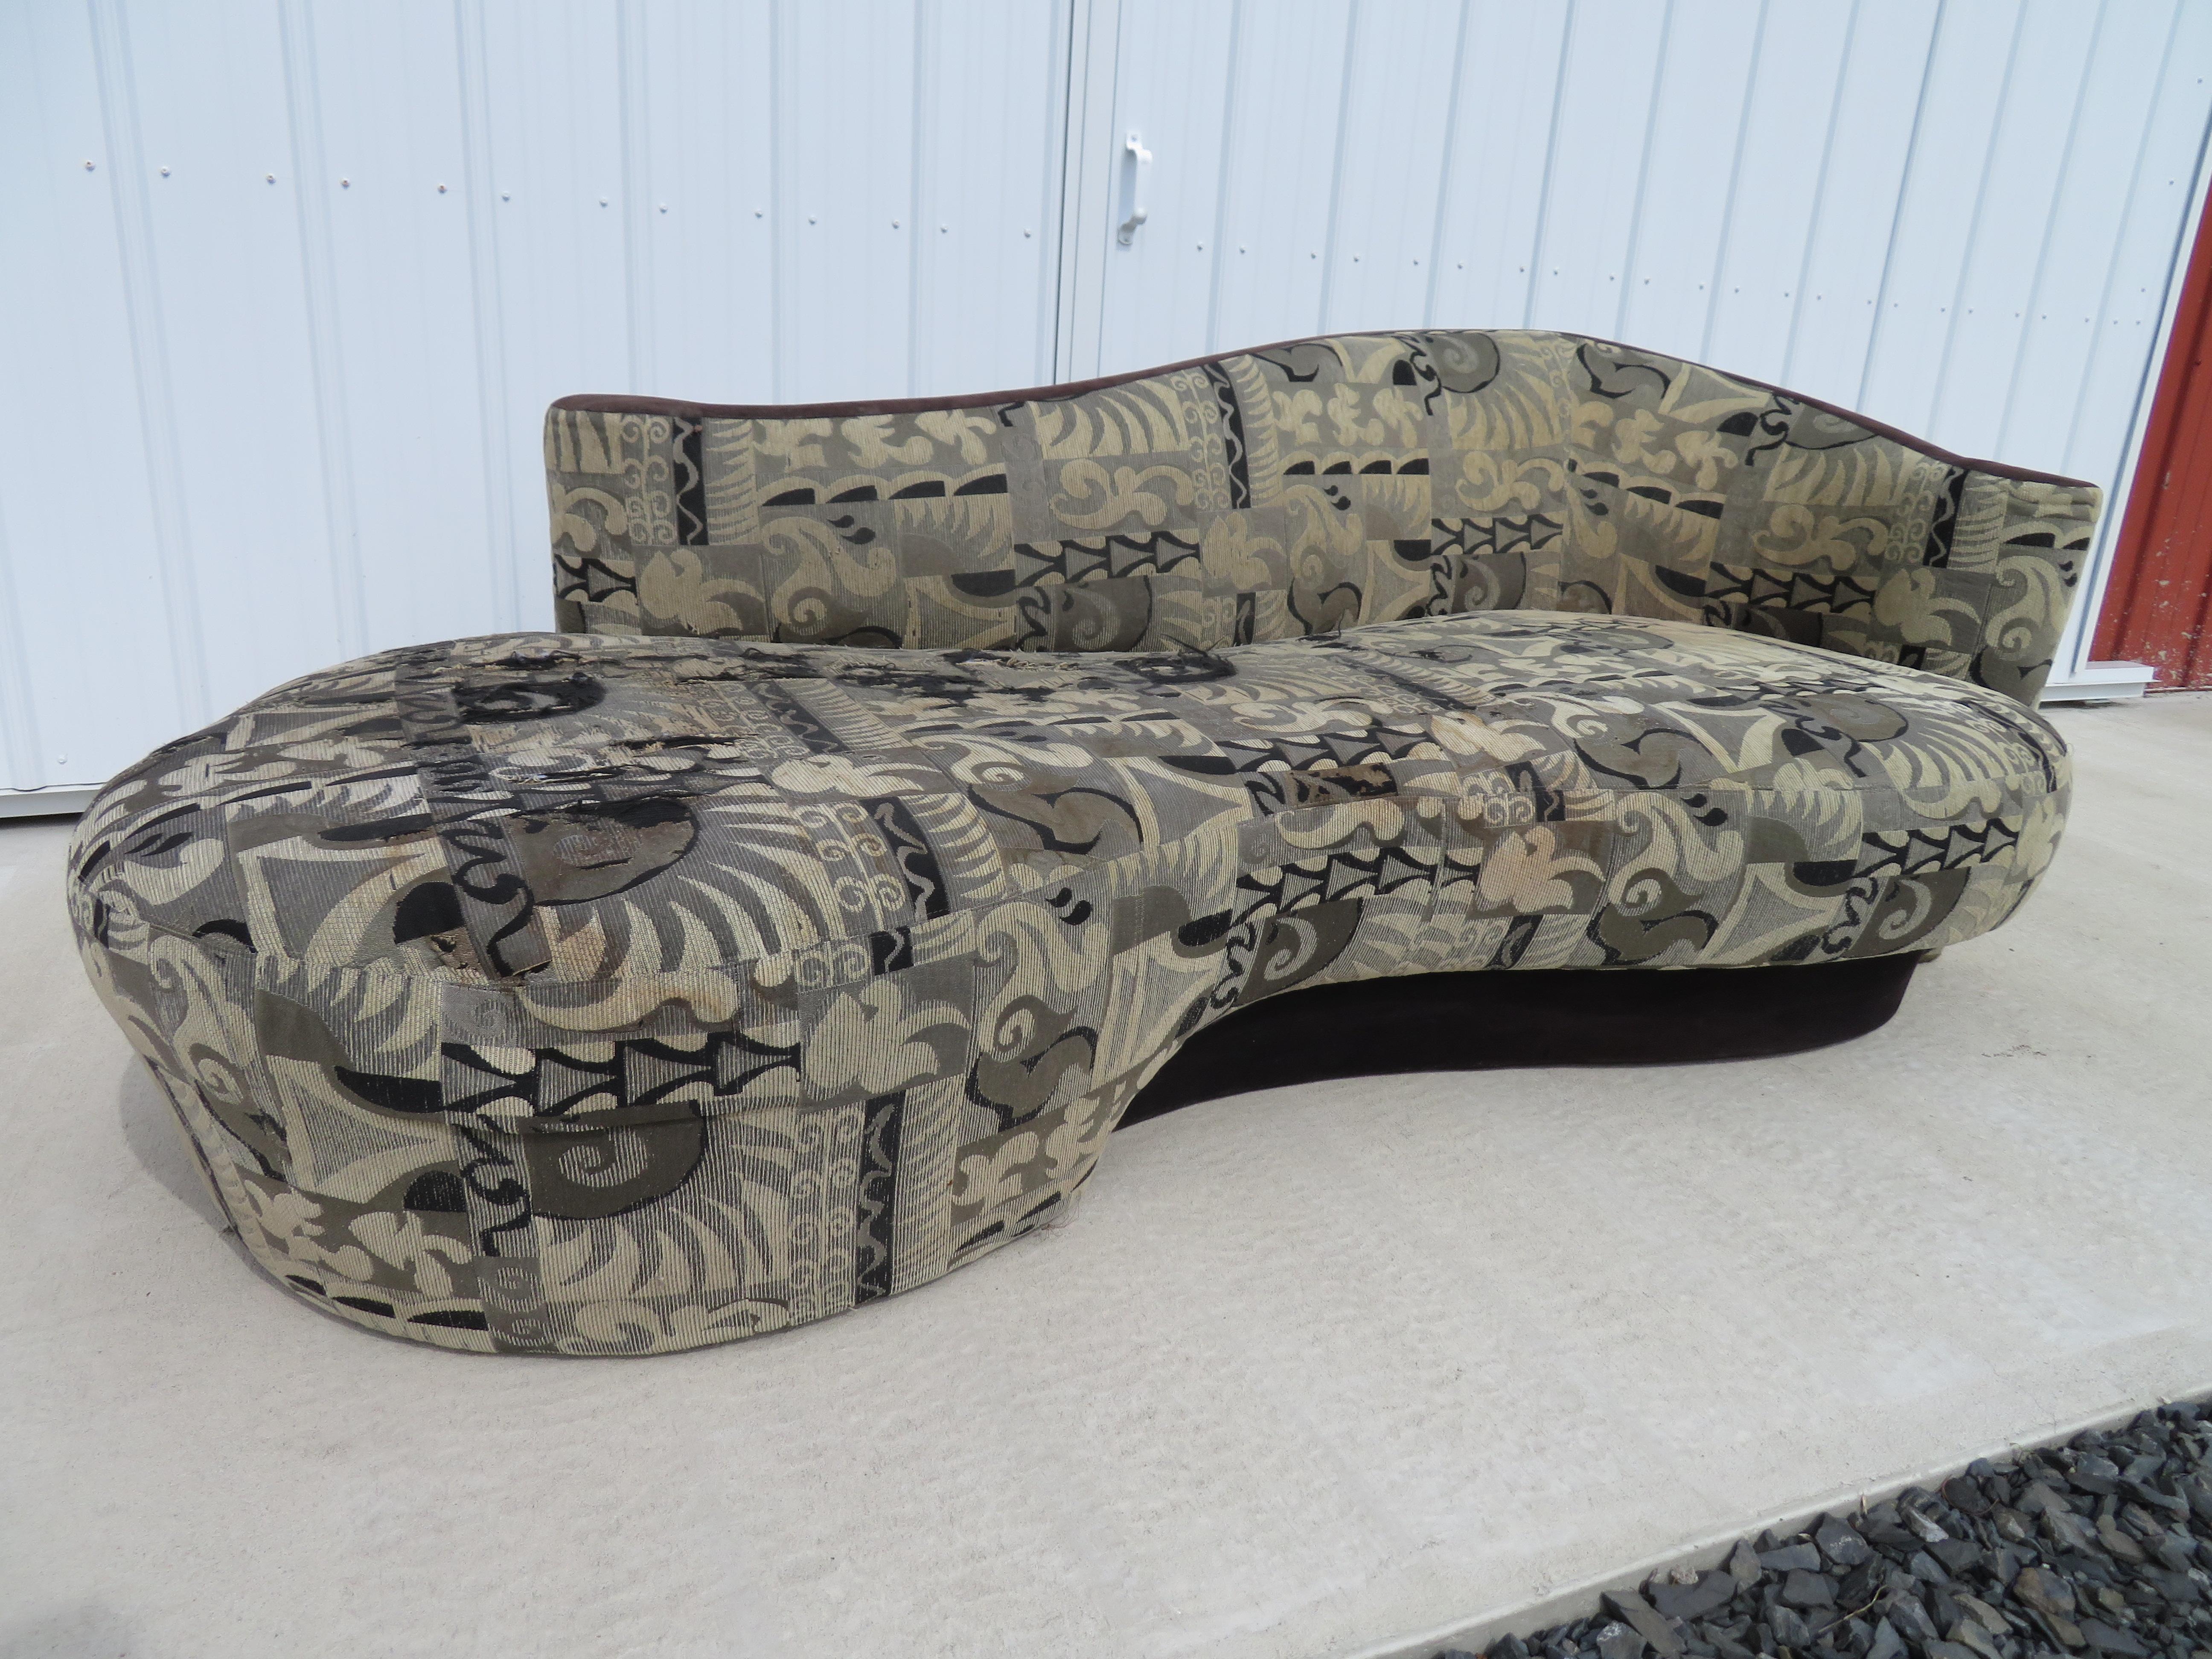 Fabulous Robert Ebel for Weiman Preview cloud sofa. This sofa retains its original upholstery which is quite dated and shows wear-we do recommend reupholstery. This fabulous sofa would look great in any Mid-Century Modern, modern, or contemporary